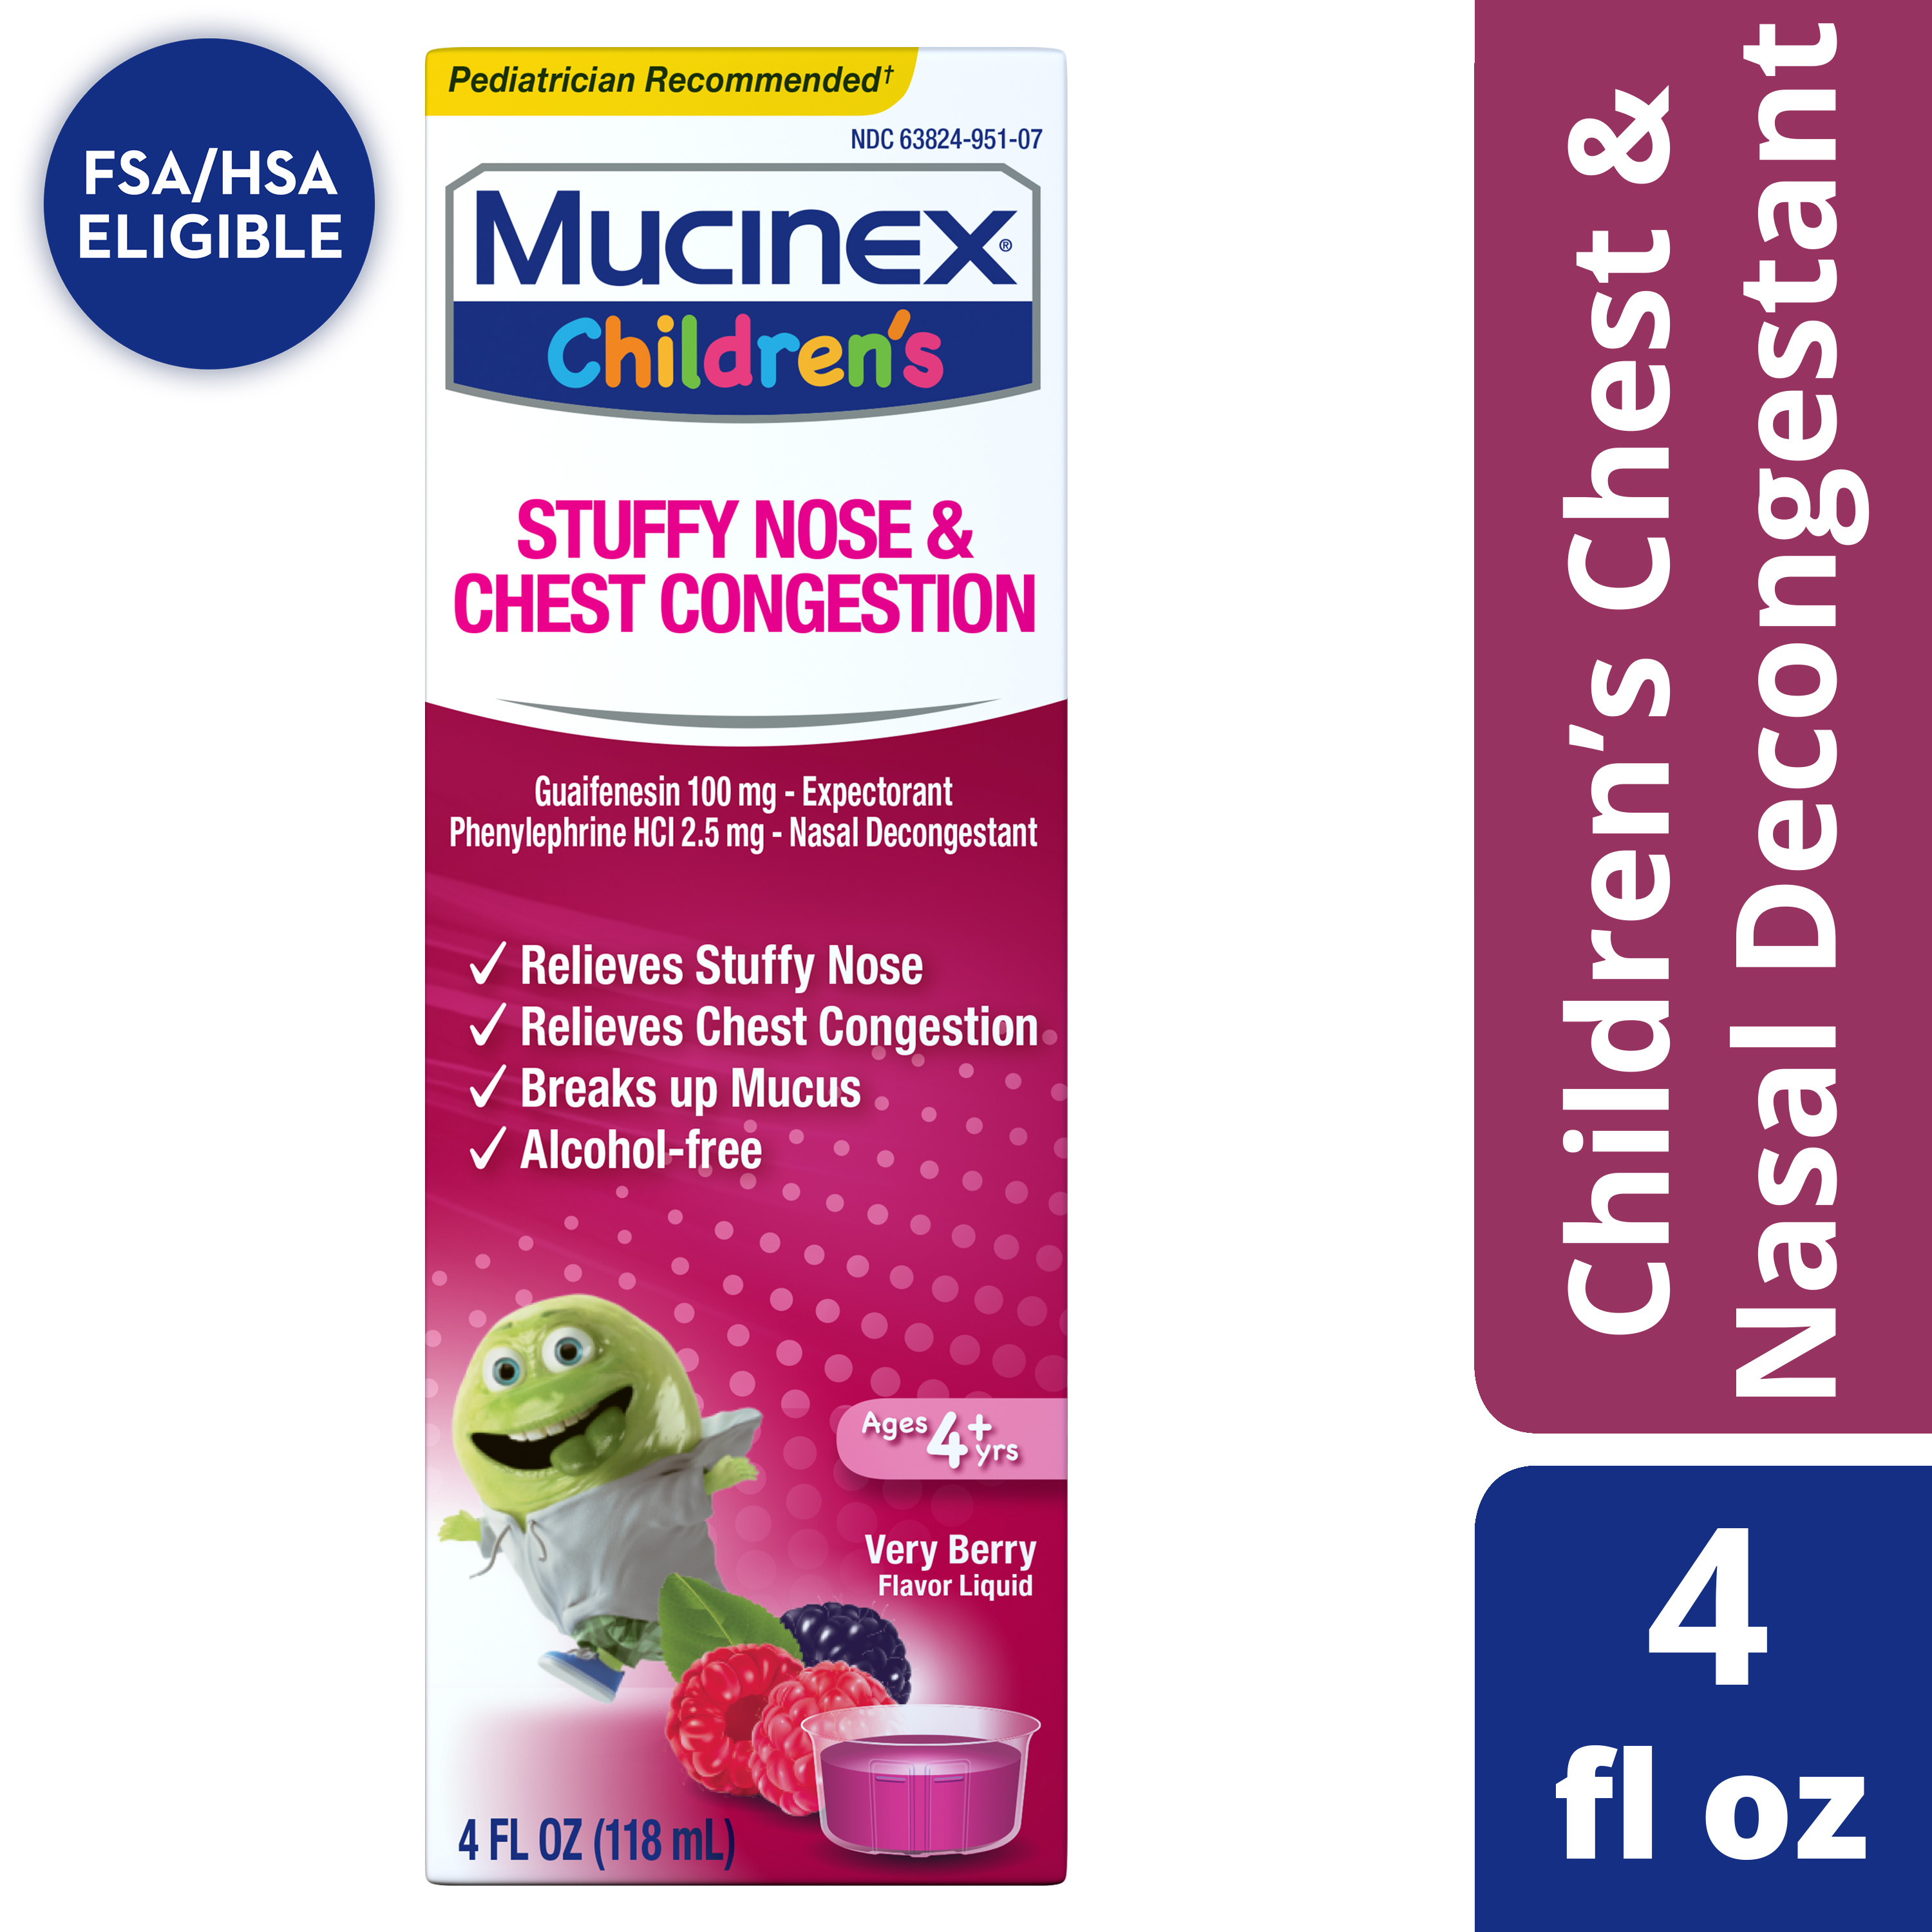 Mucinex Children's Cold Medicine, Stuffy Nose & Chest Congestion, Very Berry, 5 fl oz - image 1 of 13